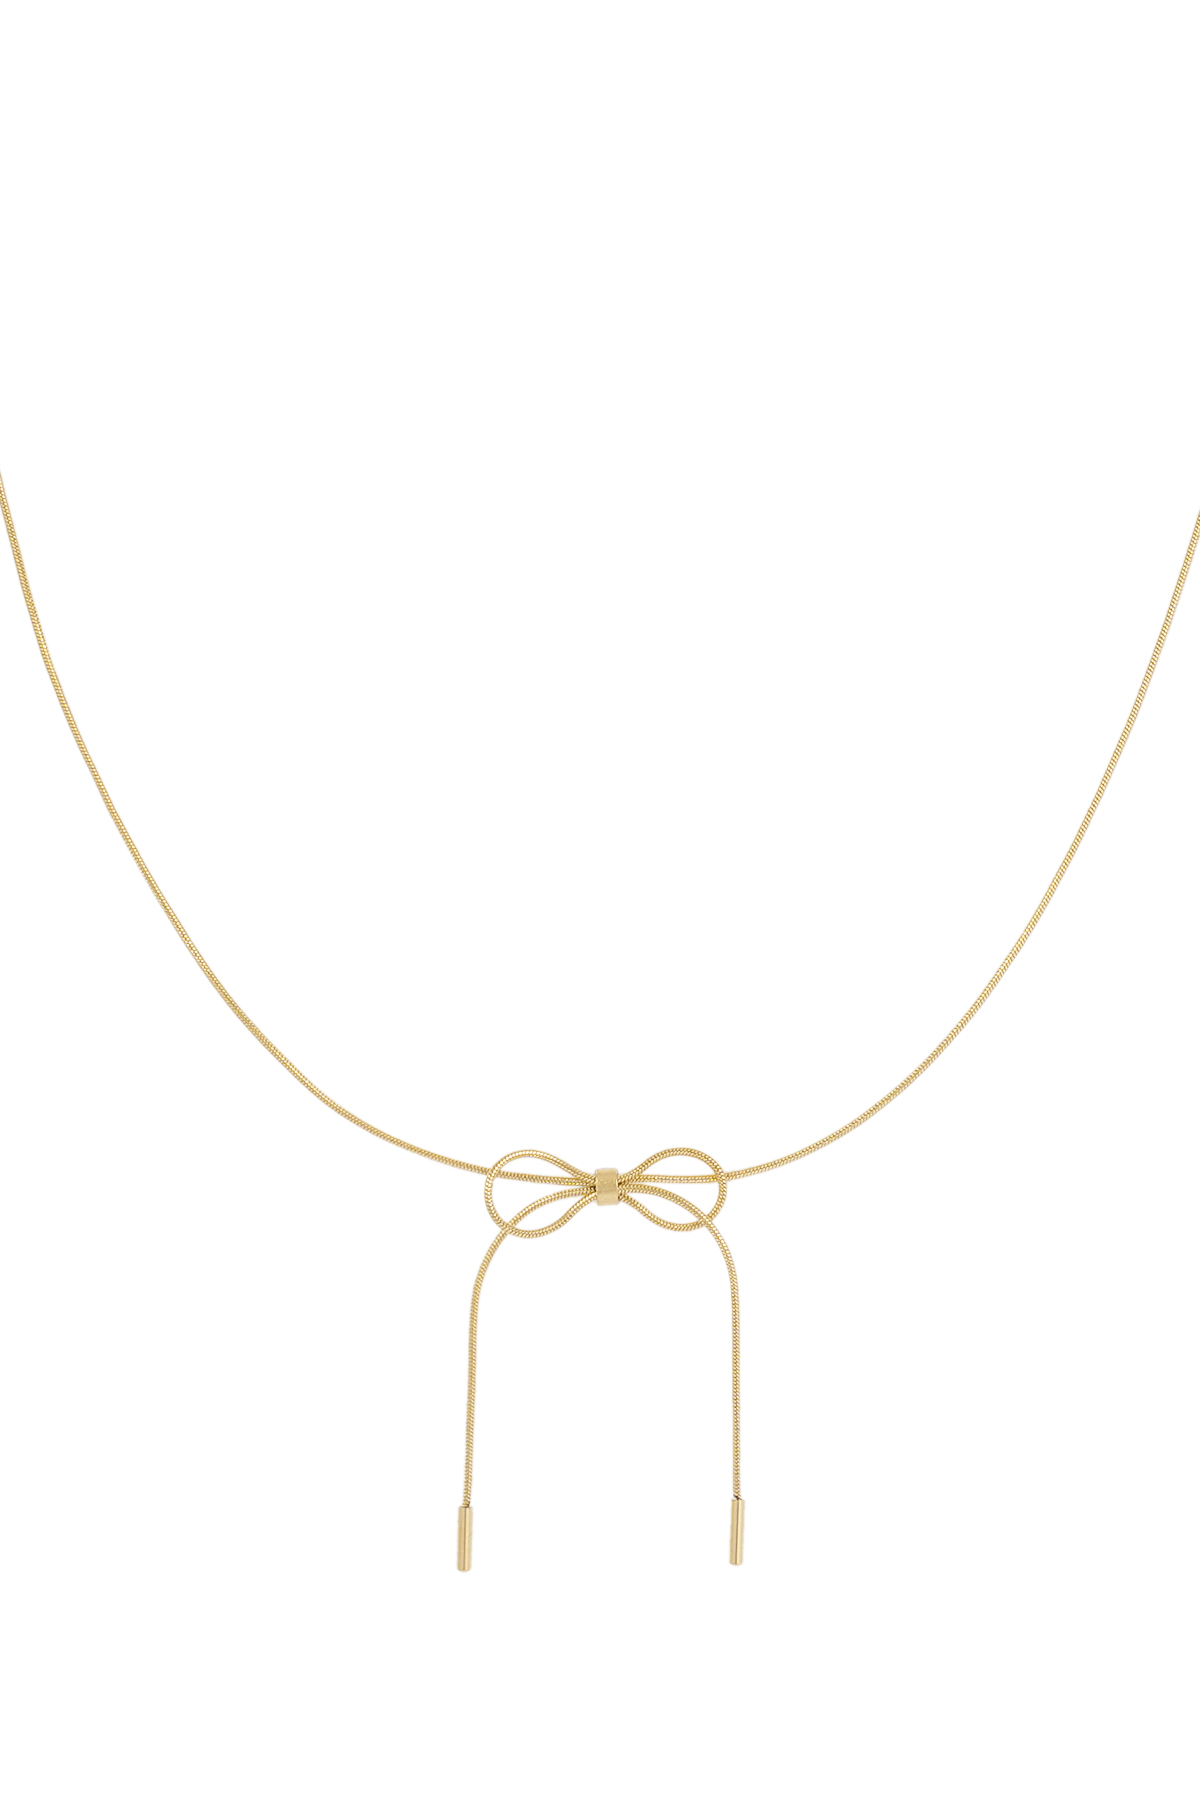 Thin chain with bows charm - gold